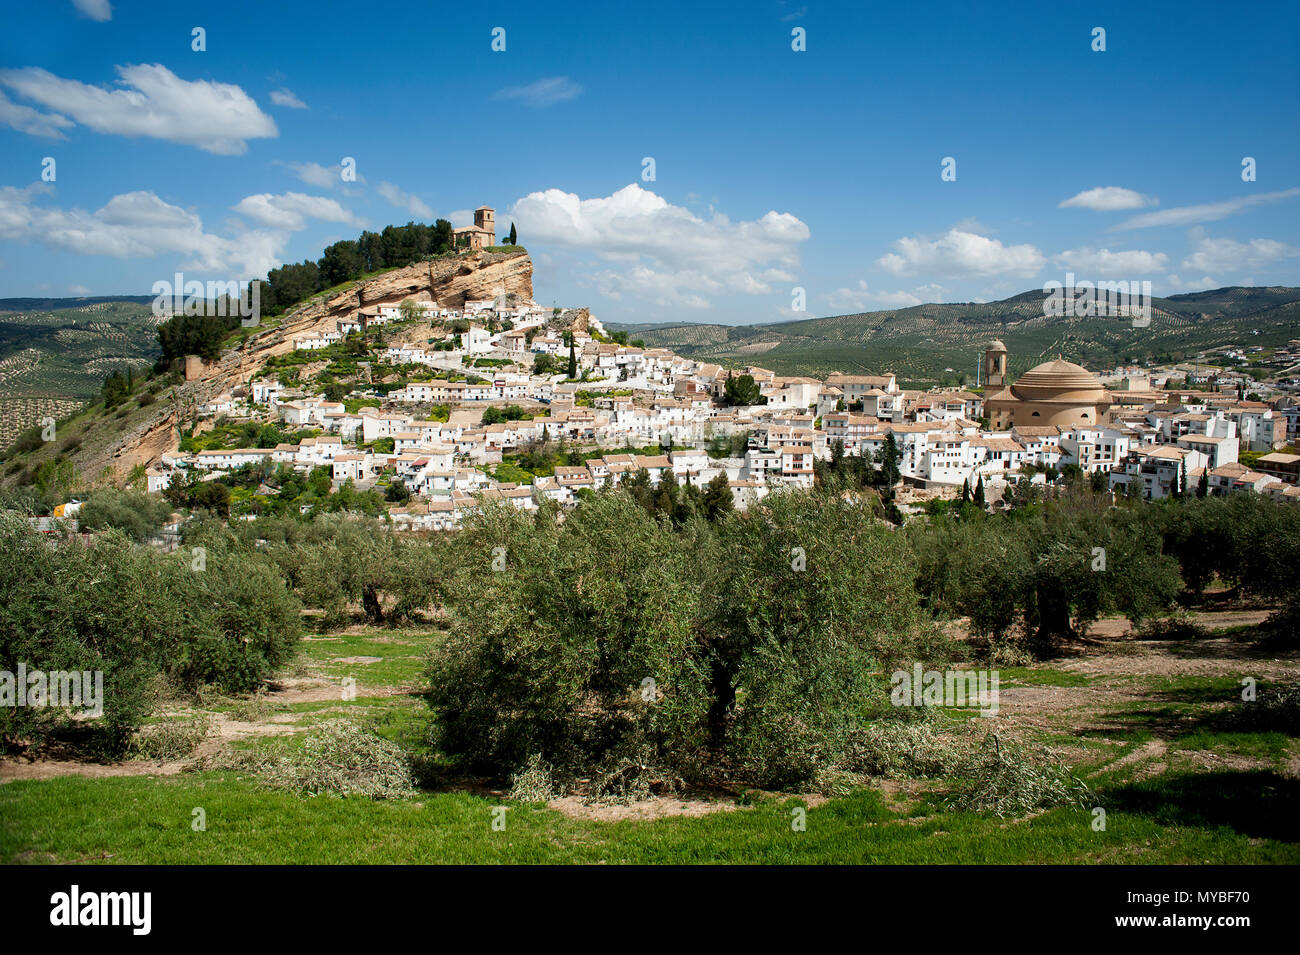 The spectacular Spanish town of Montefrio with its whitewashed houses and its sixteenth century clifftop church in the Granada region of Andalusia. Stock Photo